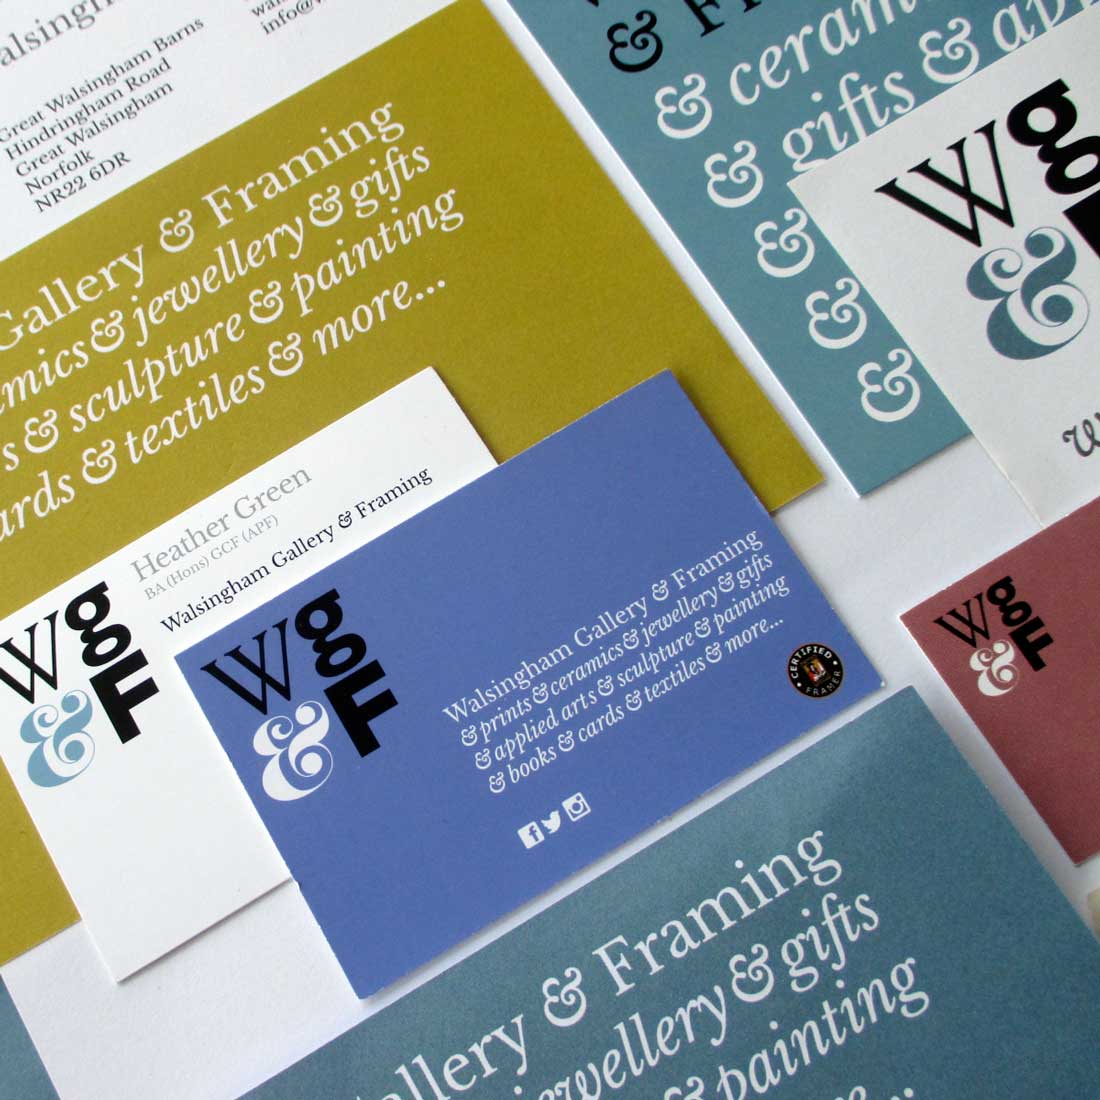 Walsingham Gallery and Framing stationary with new branding and logo